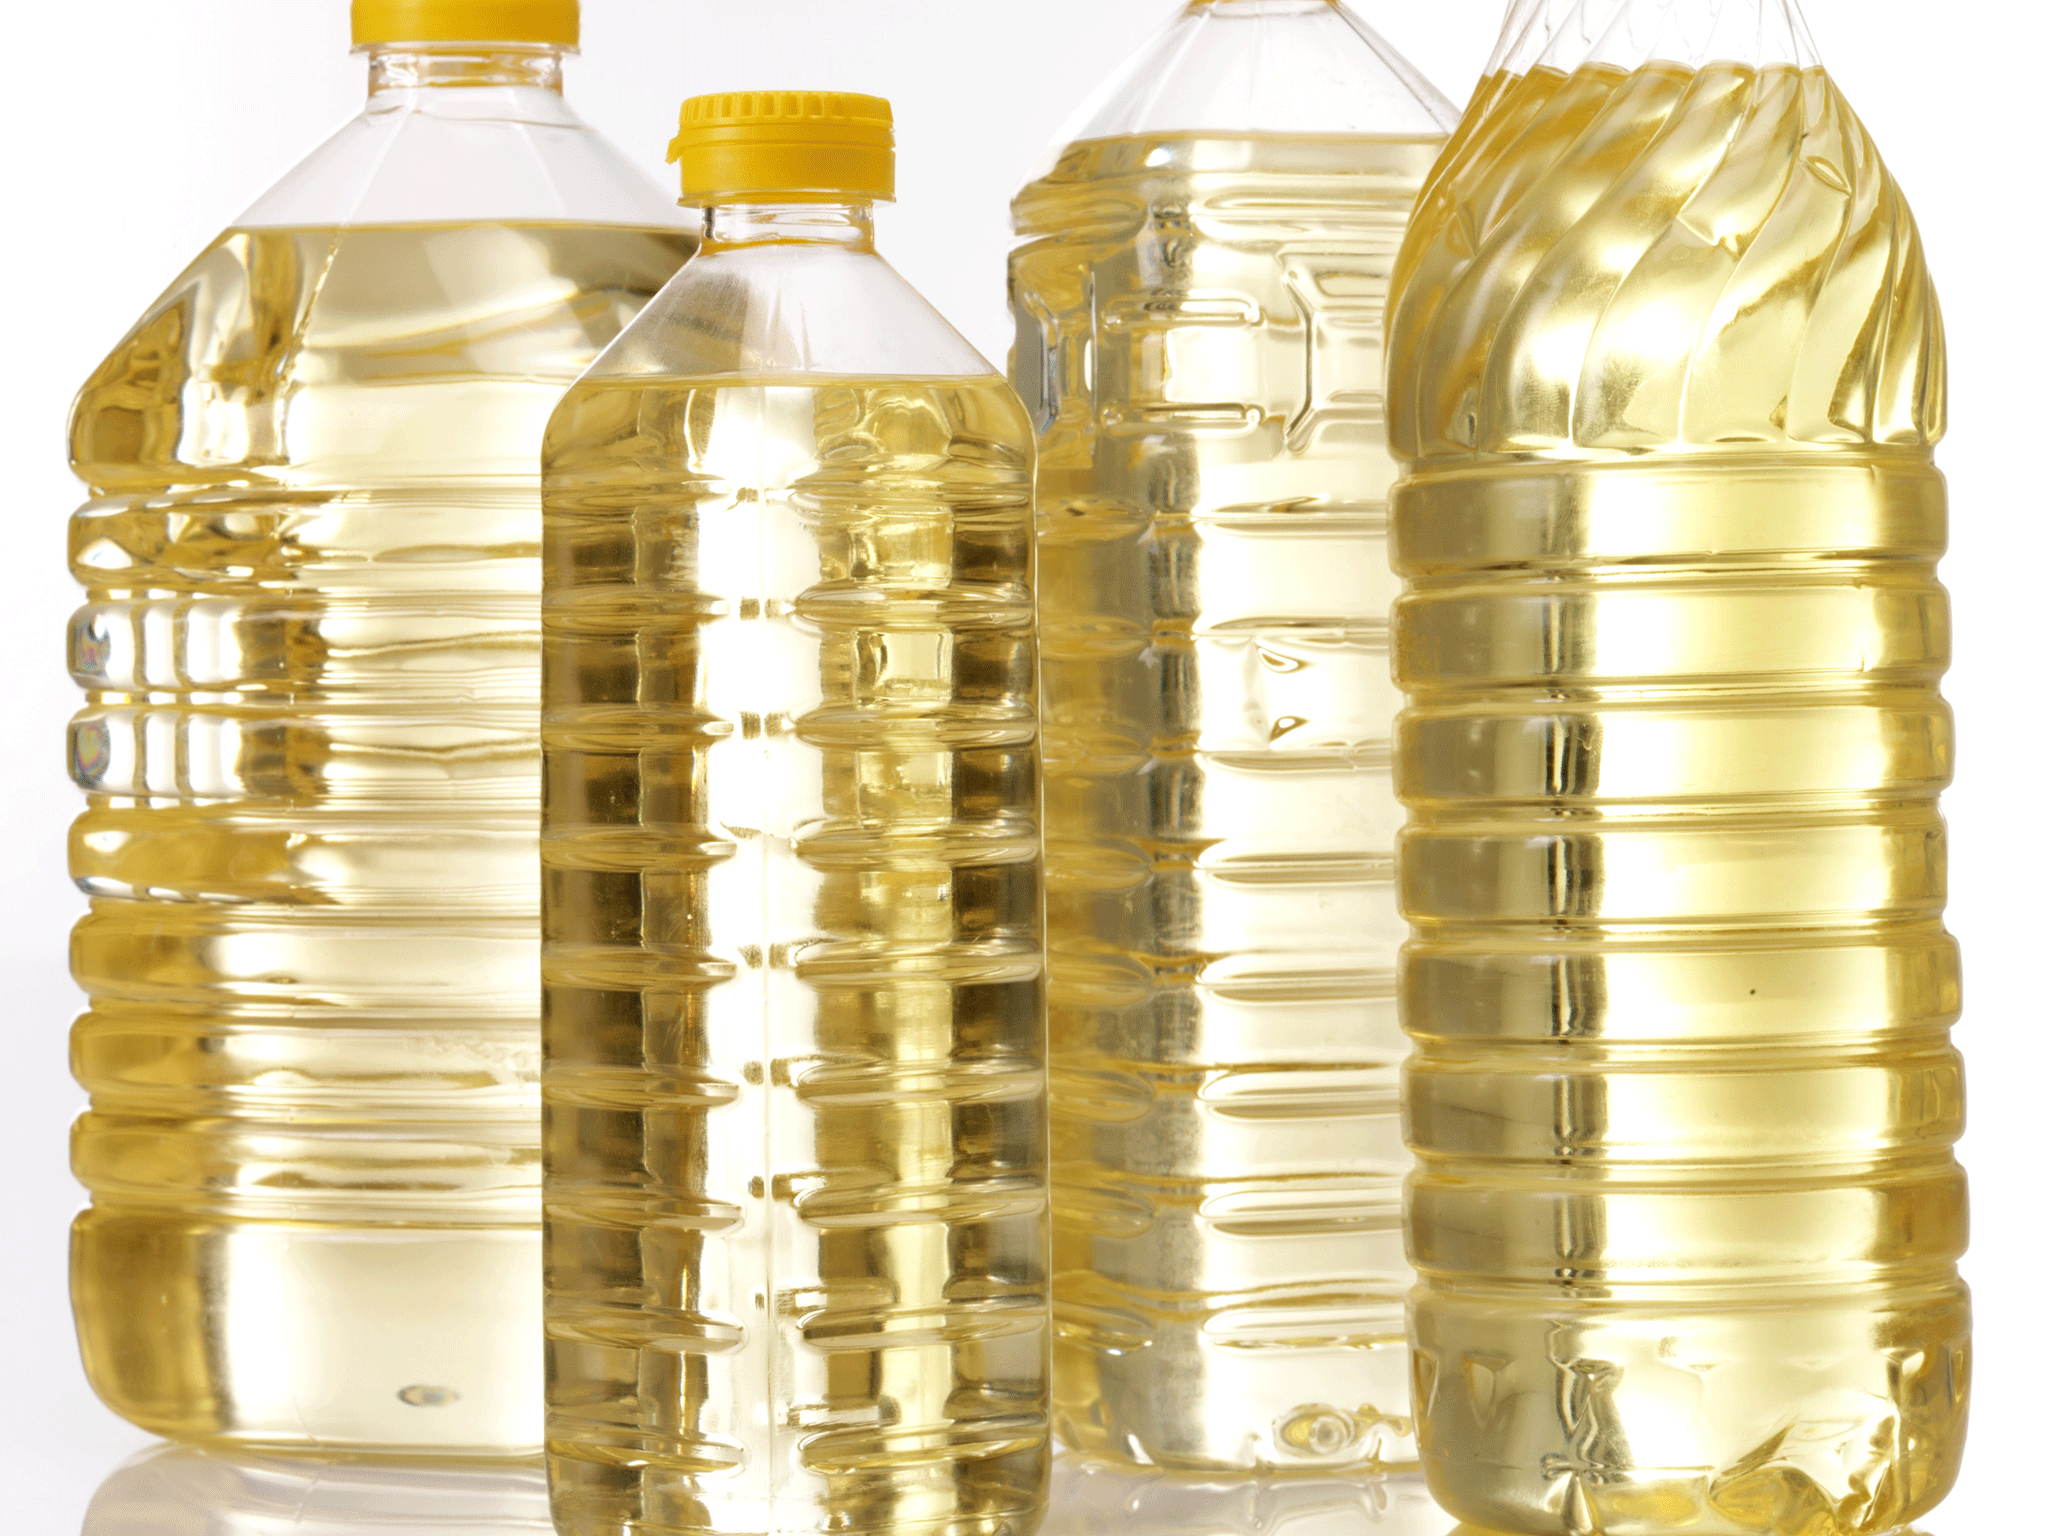 Vegetable oils contain 'toxic' chemicals, say scientists